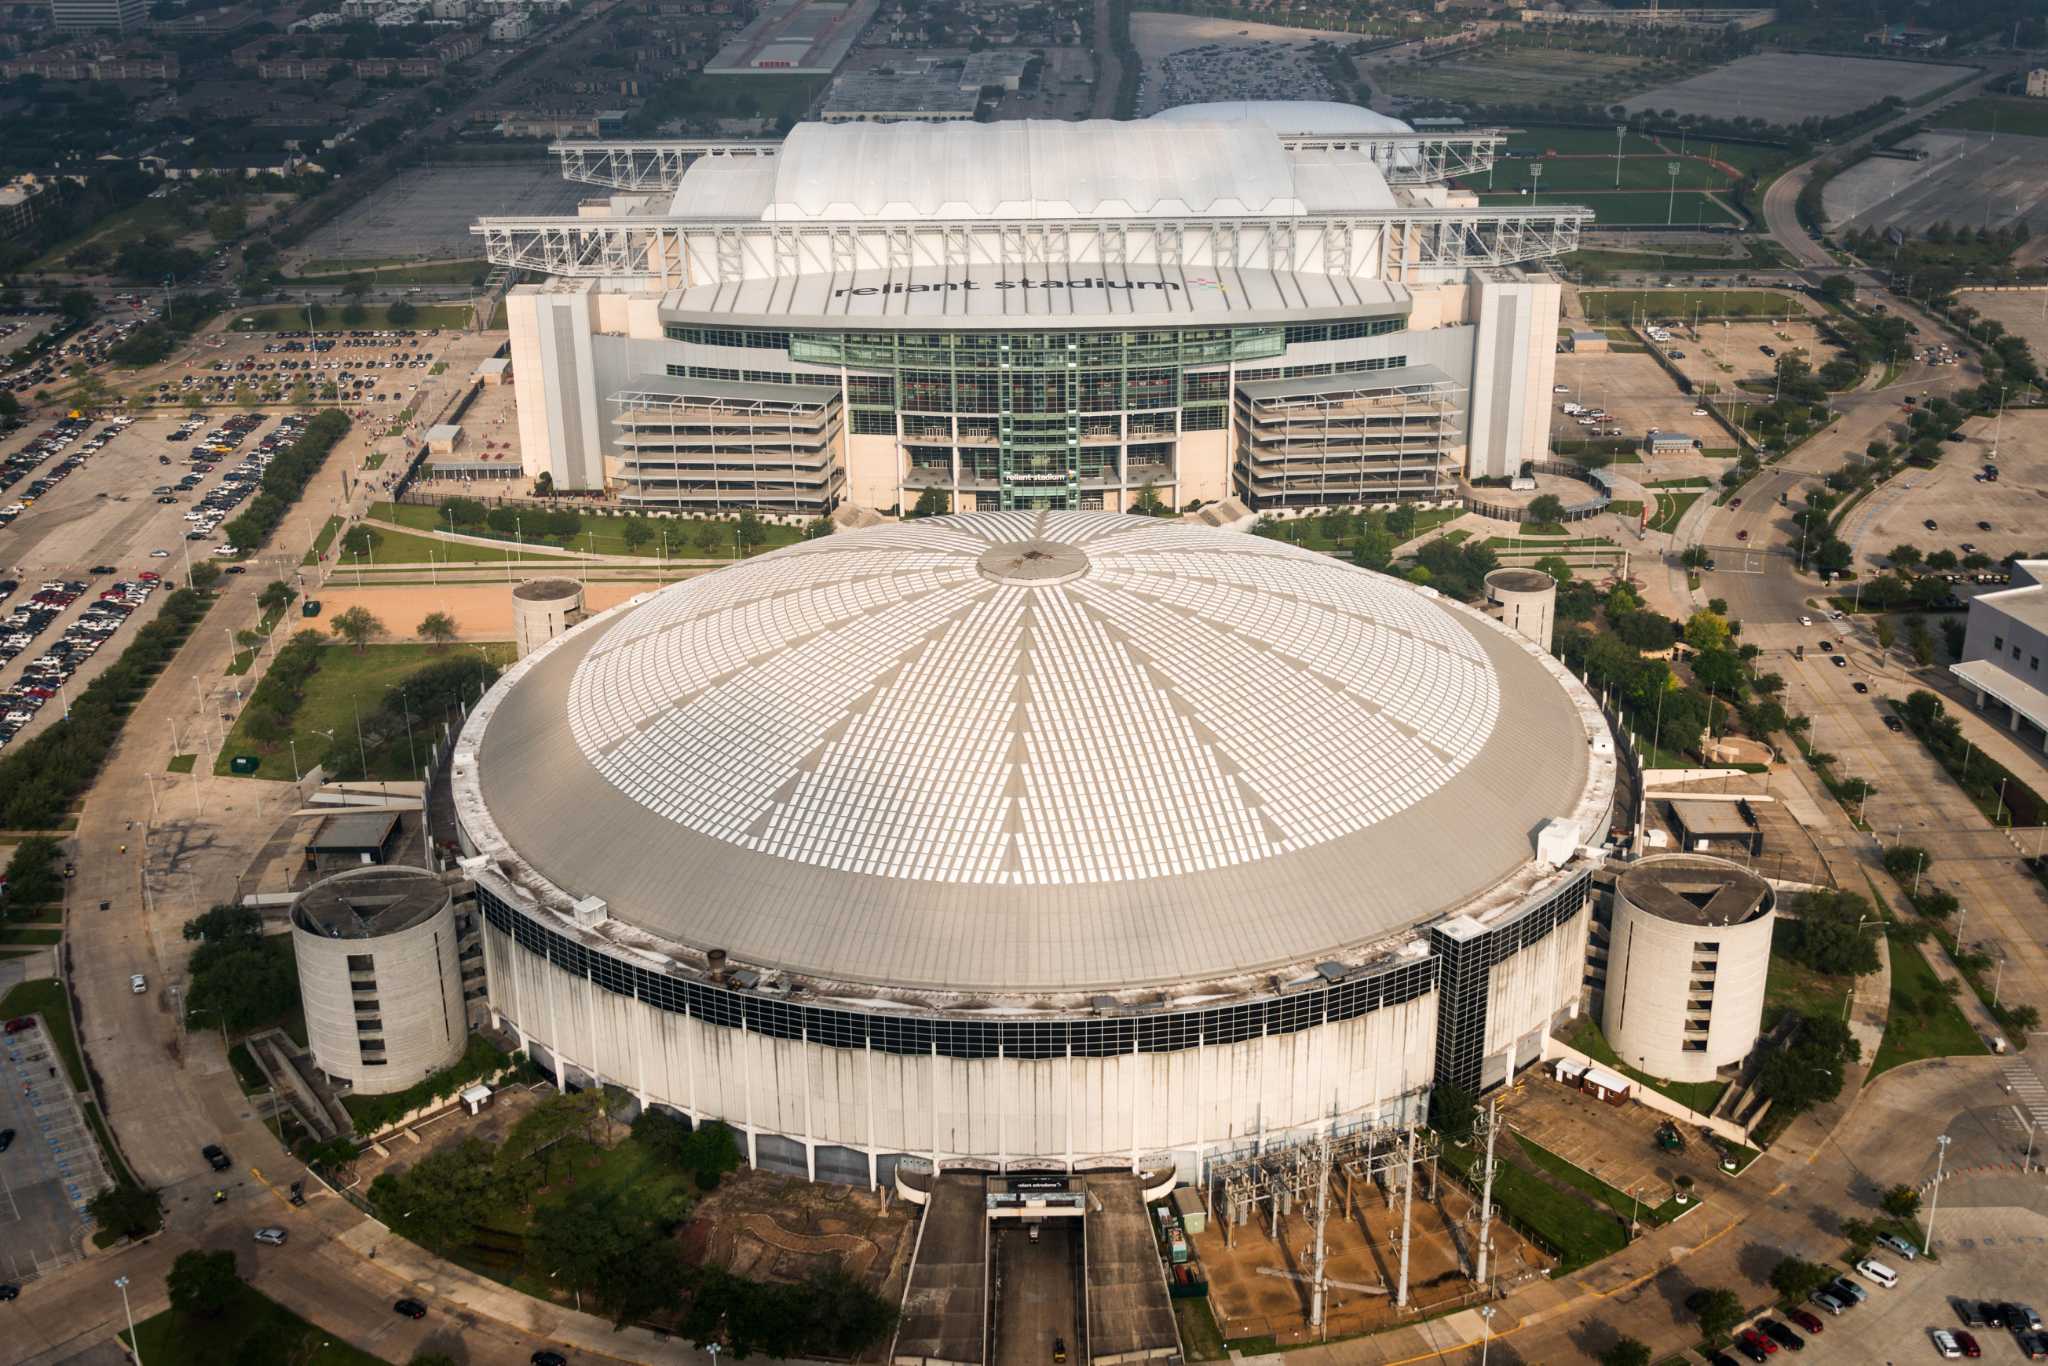 Iconic Astrodome made its grand debut 55 years ago, became 'Eighth Wonder  of the World